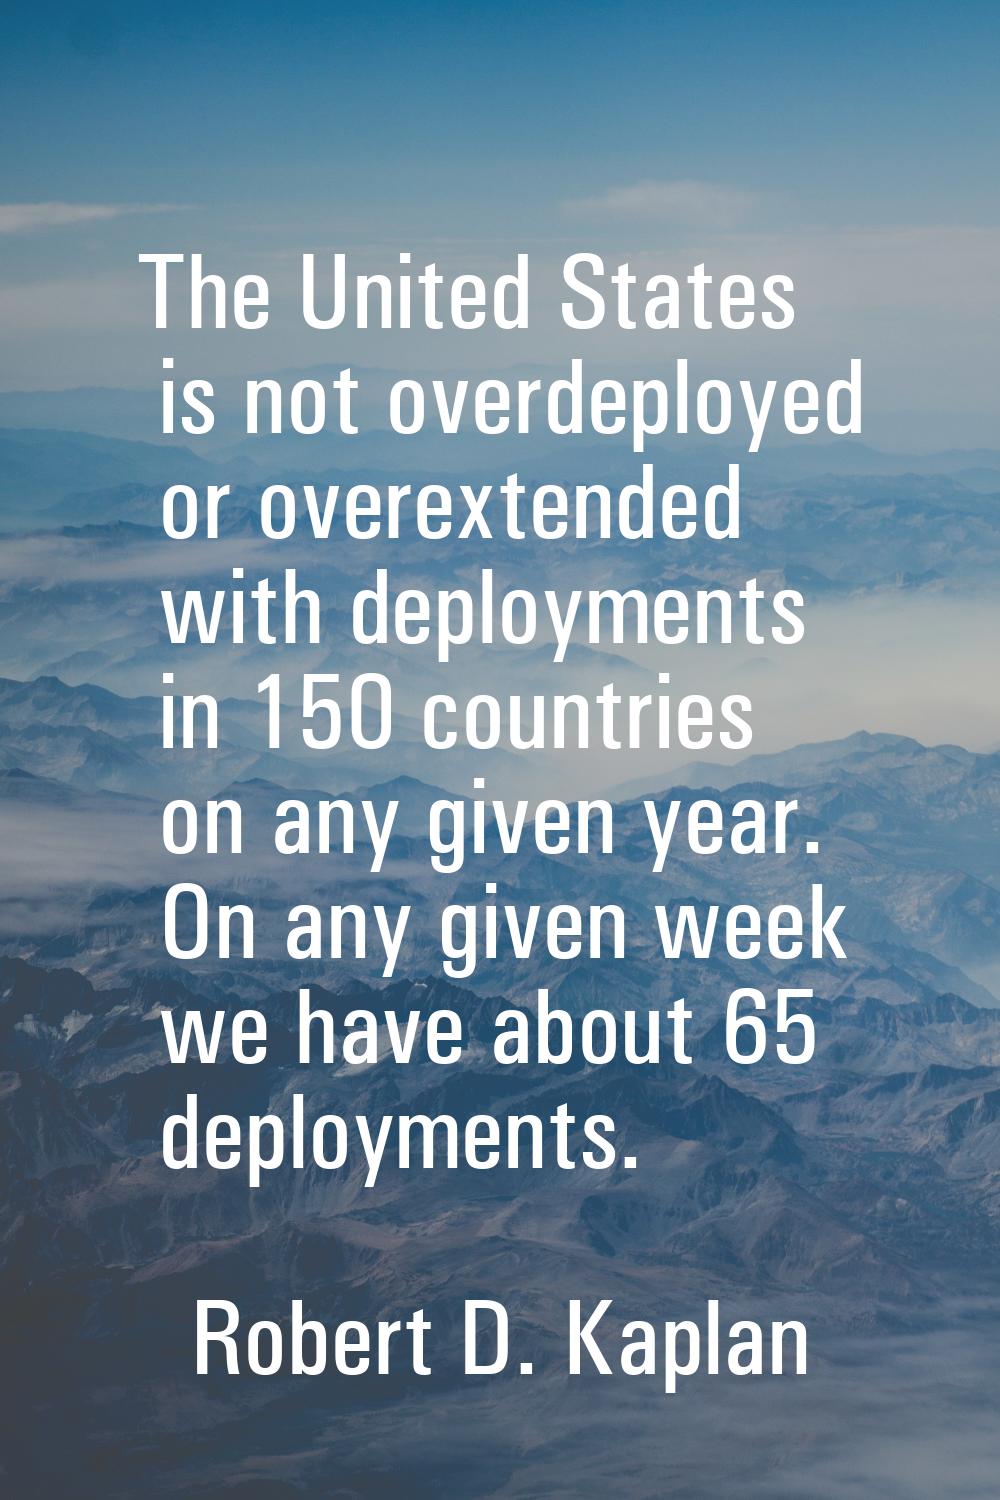 The United States is not overdeployed or overextended with deployments in 150 countries on any give